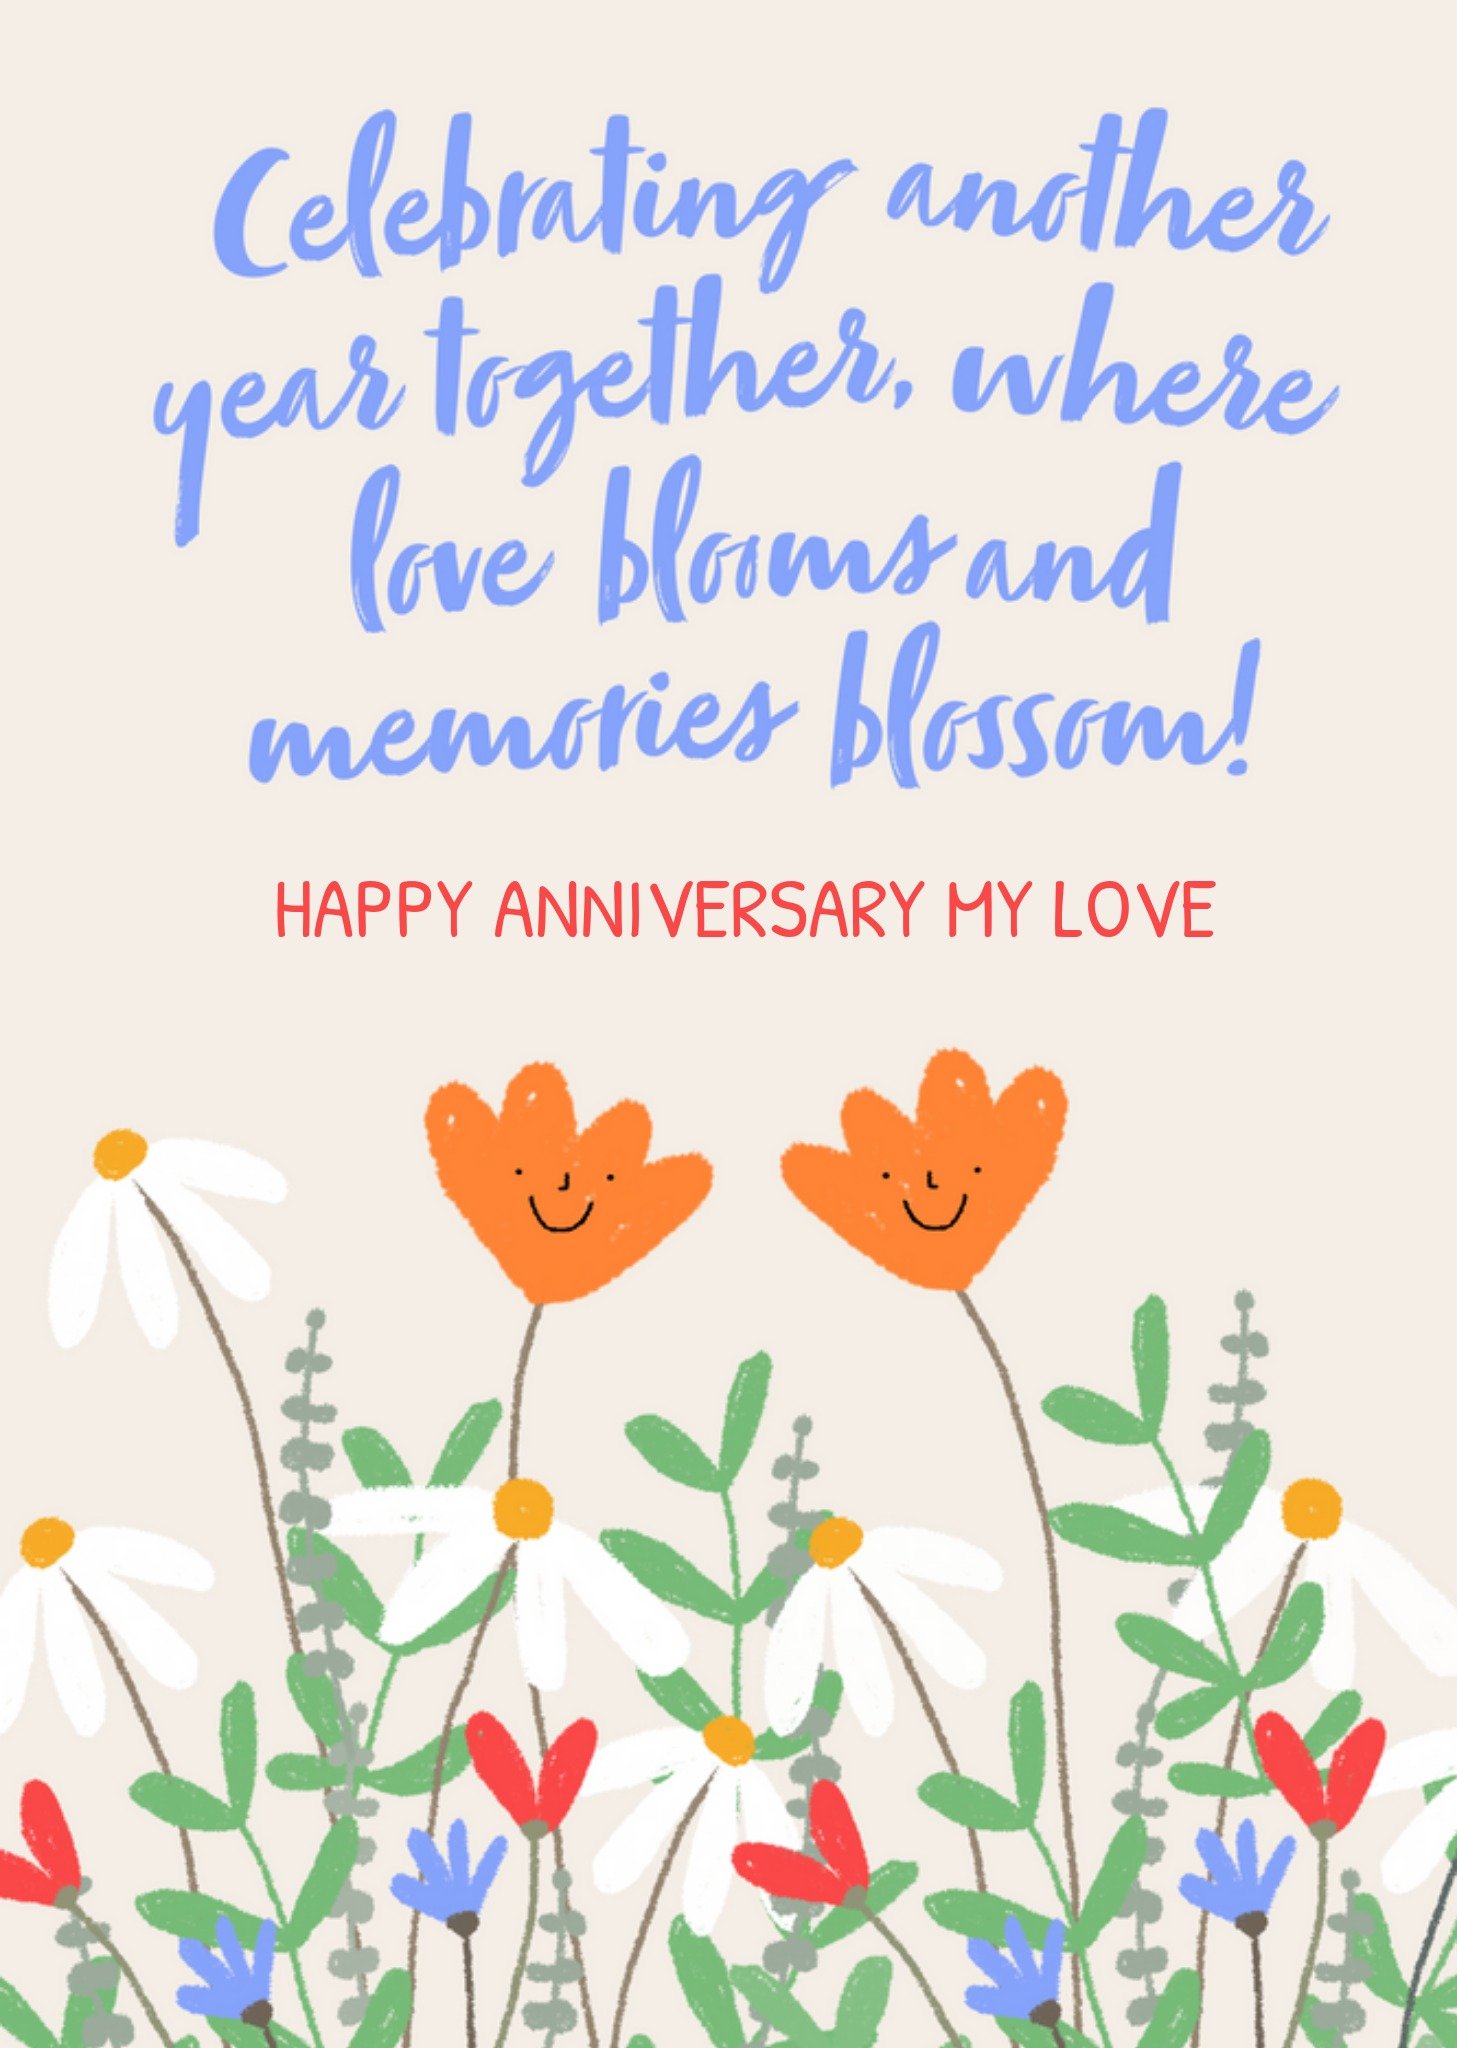 Moonpig Celebrating Another Year Together Where Love Blooms And Memories Blossom Illustrated Flowers